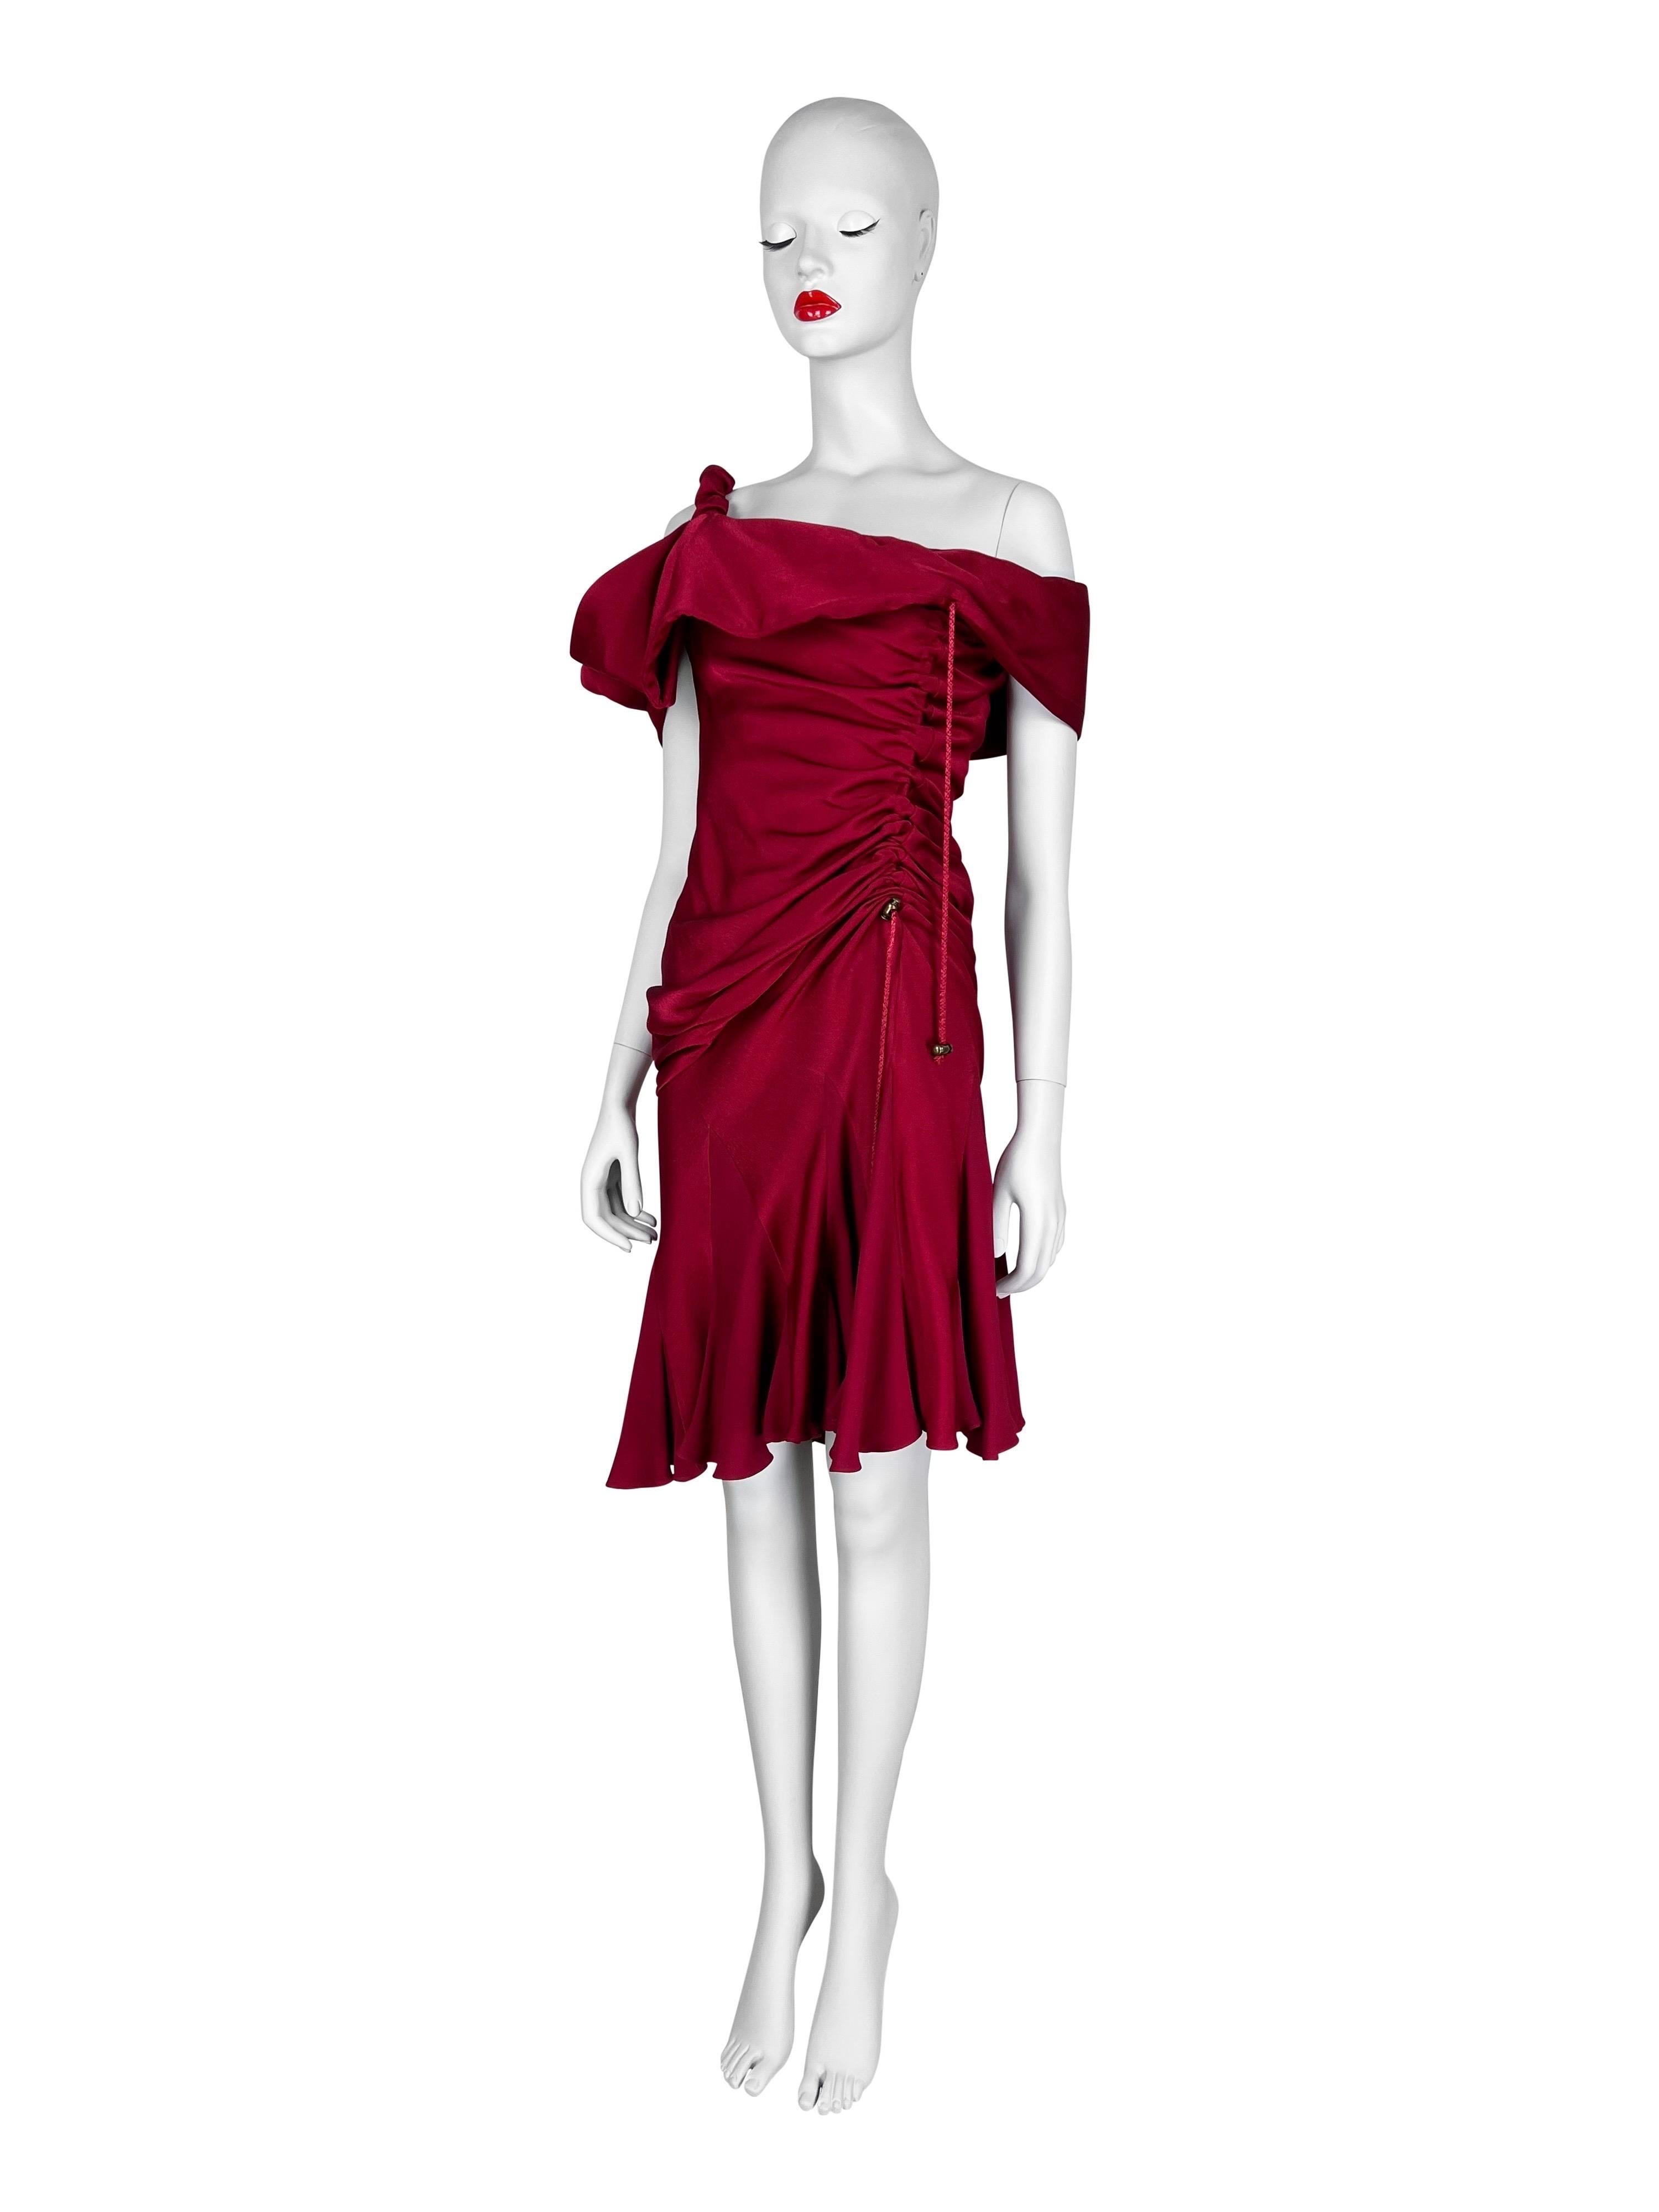 A beautiful and fun dress with multiple styling options due to the adjustable draping lace. 

Size FR 38, US 4, however can accommodate a size larger.

Measurements (flat lay on one side):

Armpit to armpit - 42 cm (16,5 in)
Waist - 35-38 cm